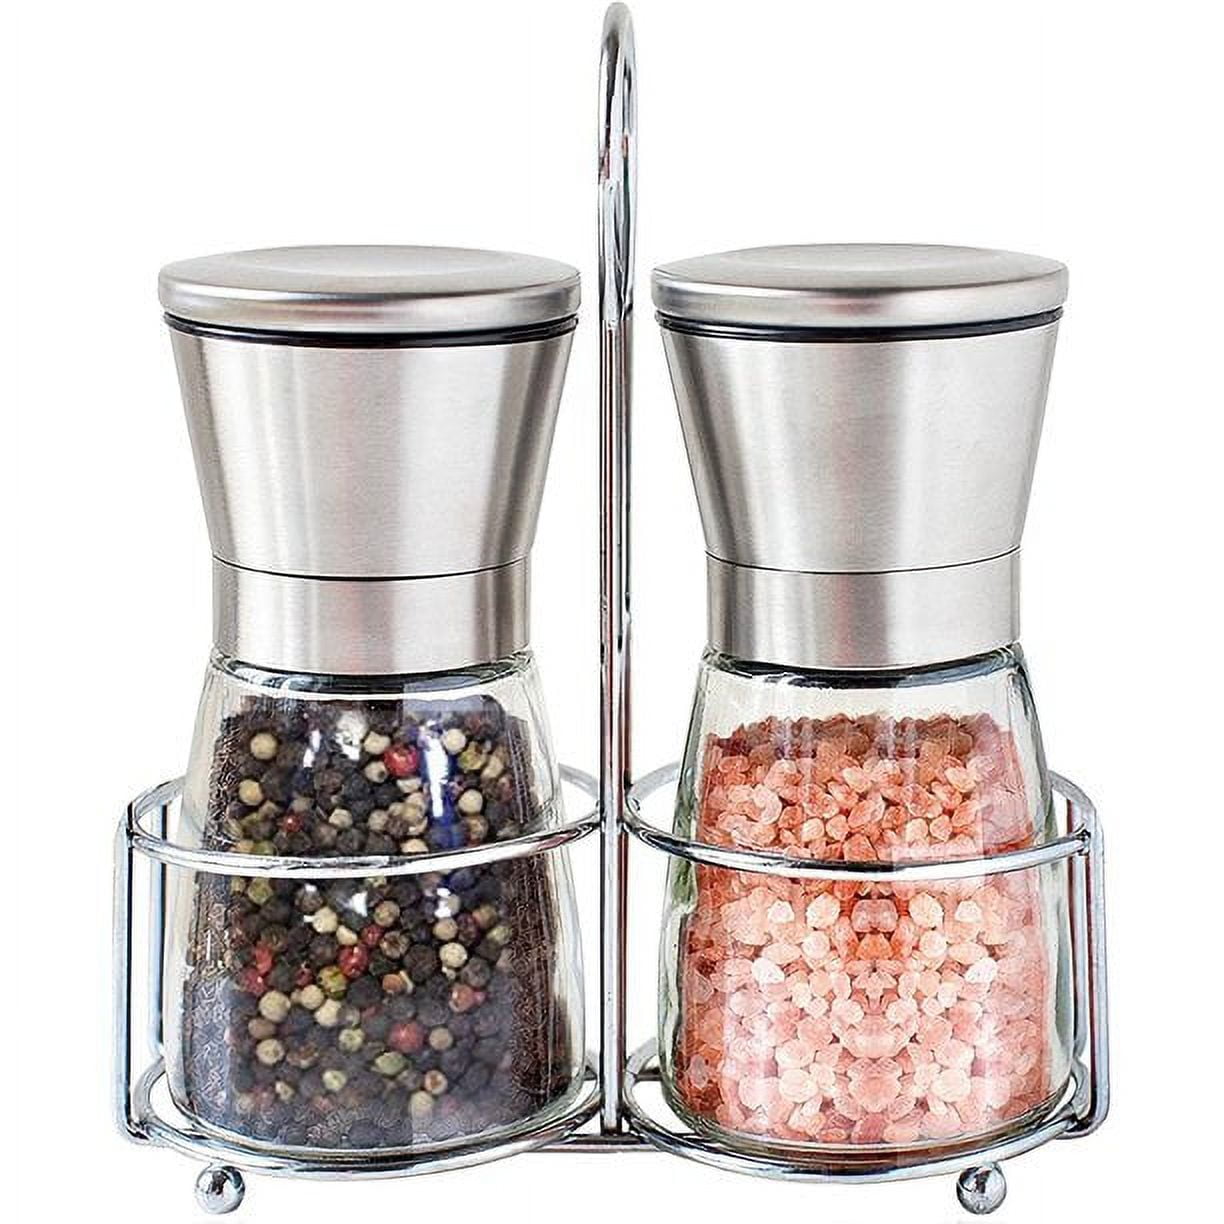 DERGUAM Gravity Electric Salt and Pepper Grinder Set, Stainless Steel  Automatic Pepper and Salt Mill Grinder, Salt Grinder Spice Grinder with